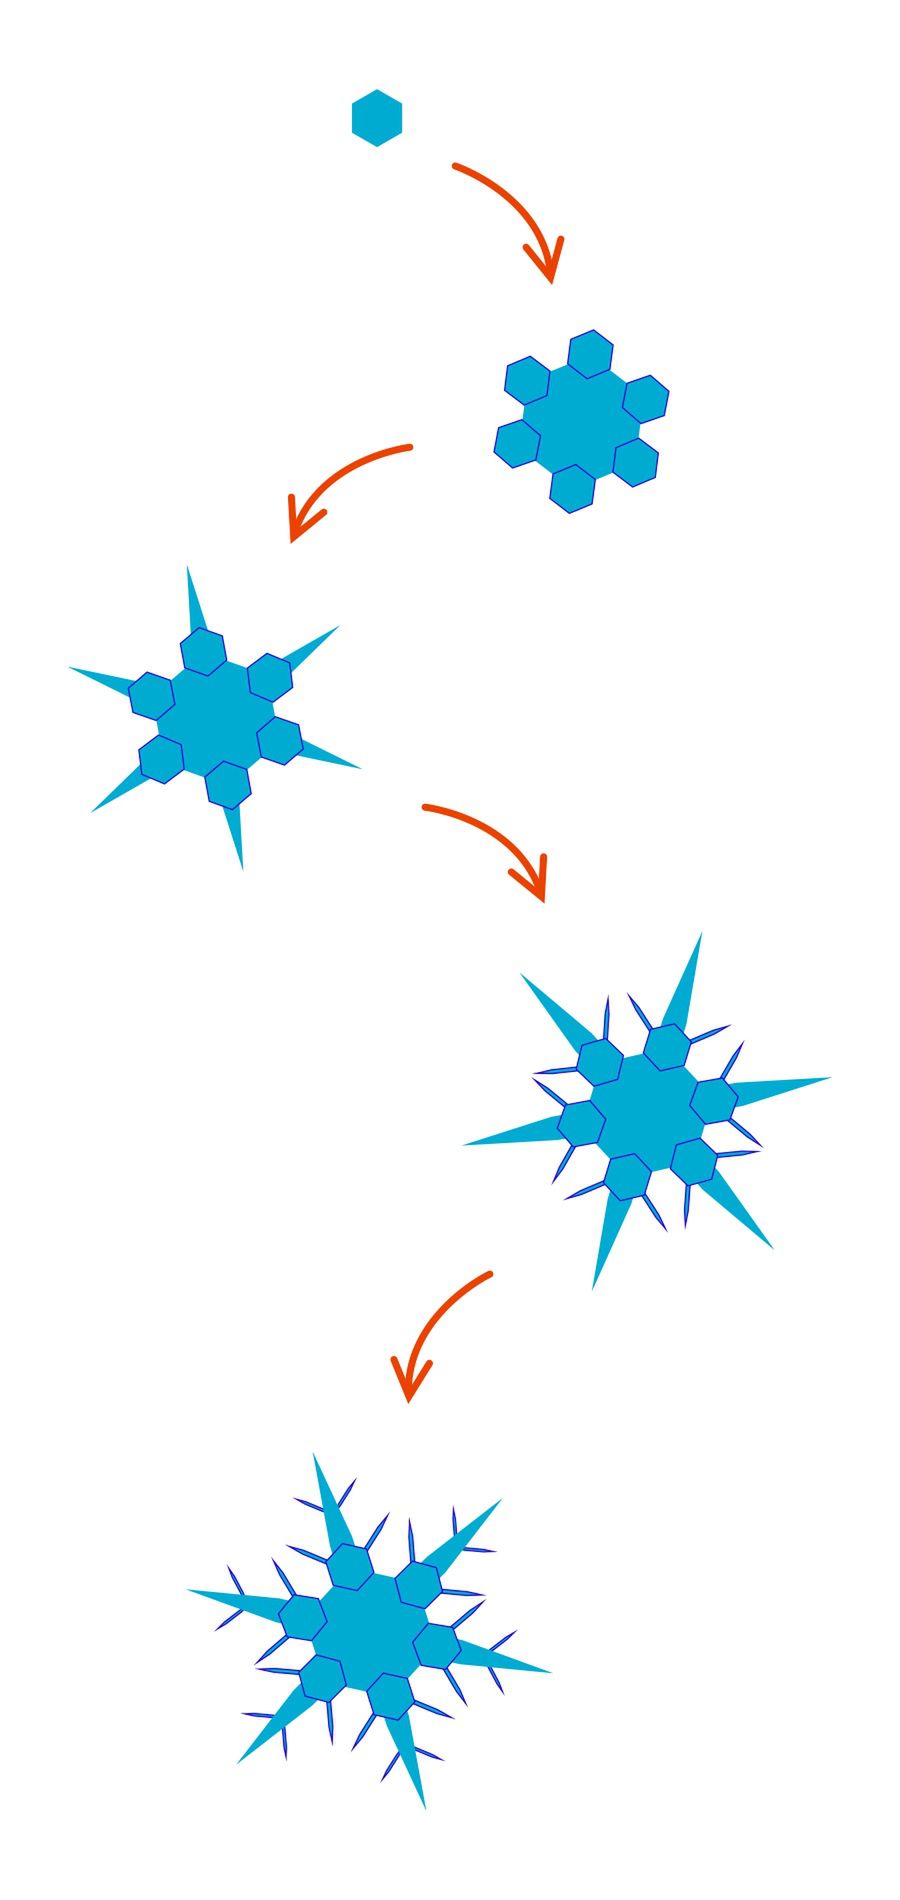 The process of snowflake formation